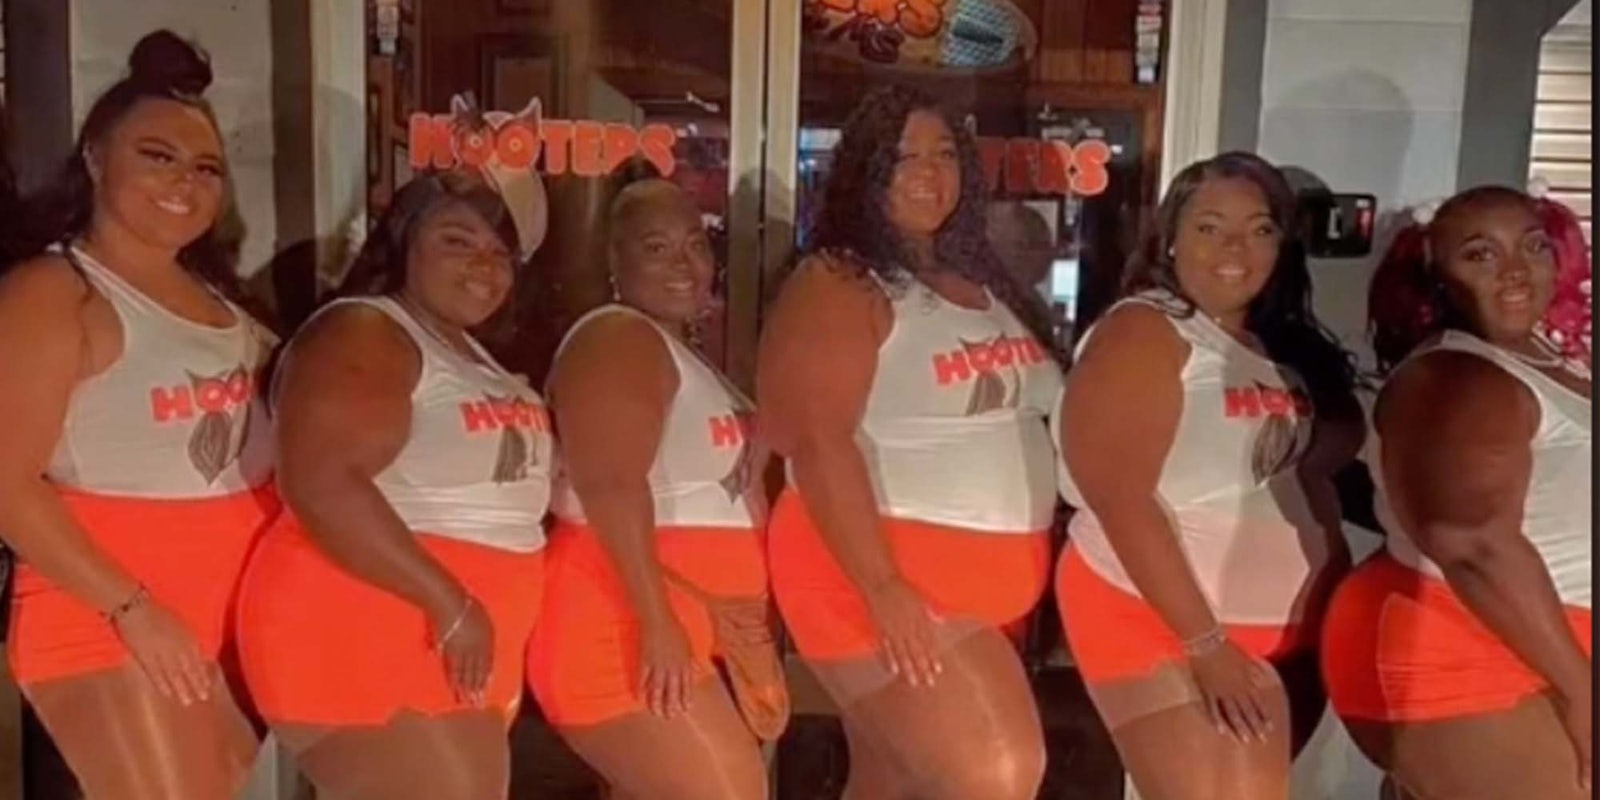 A TikTok about the concept of a plus sized Hooters sparks debate among commenters.